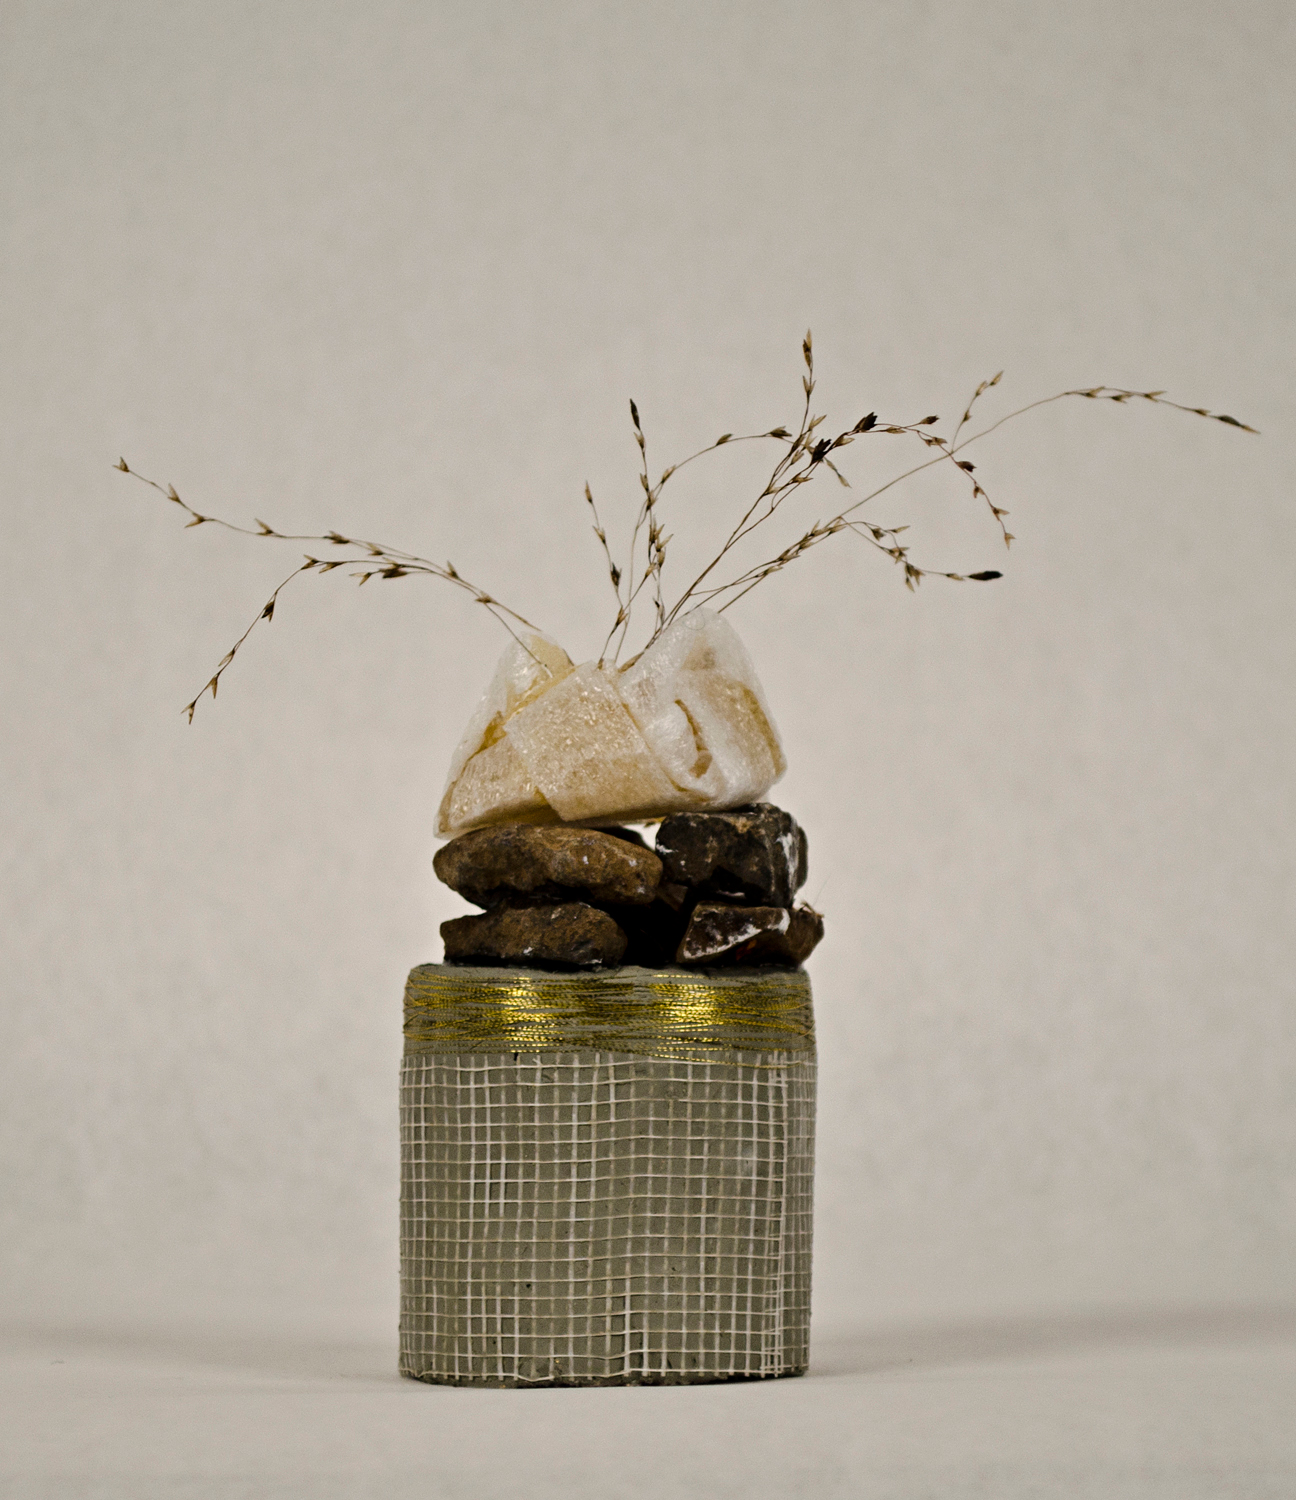 Jessica Lund, feathered, 2014. Clay, drywall tape, gravel, goam, rubber adhesive, grass fronds, 8 x 3 x 3 in.